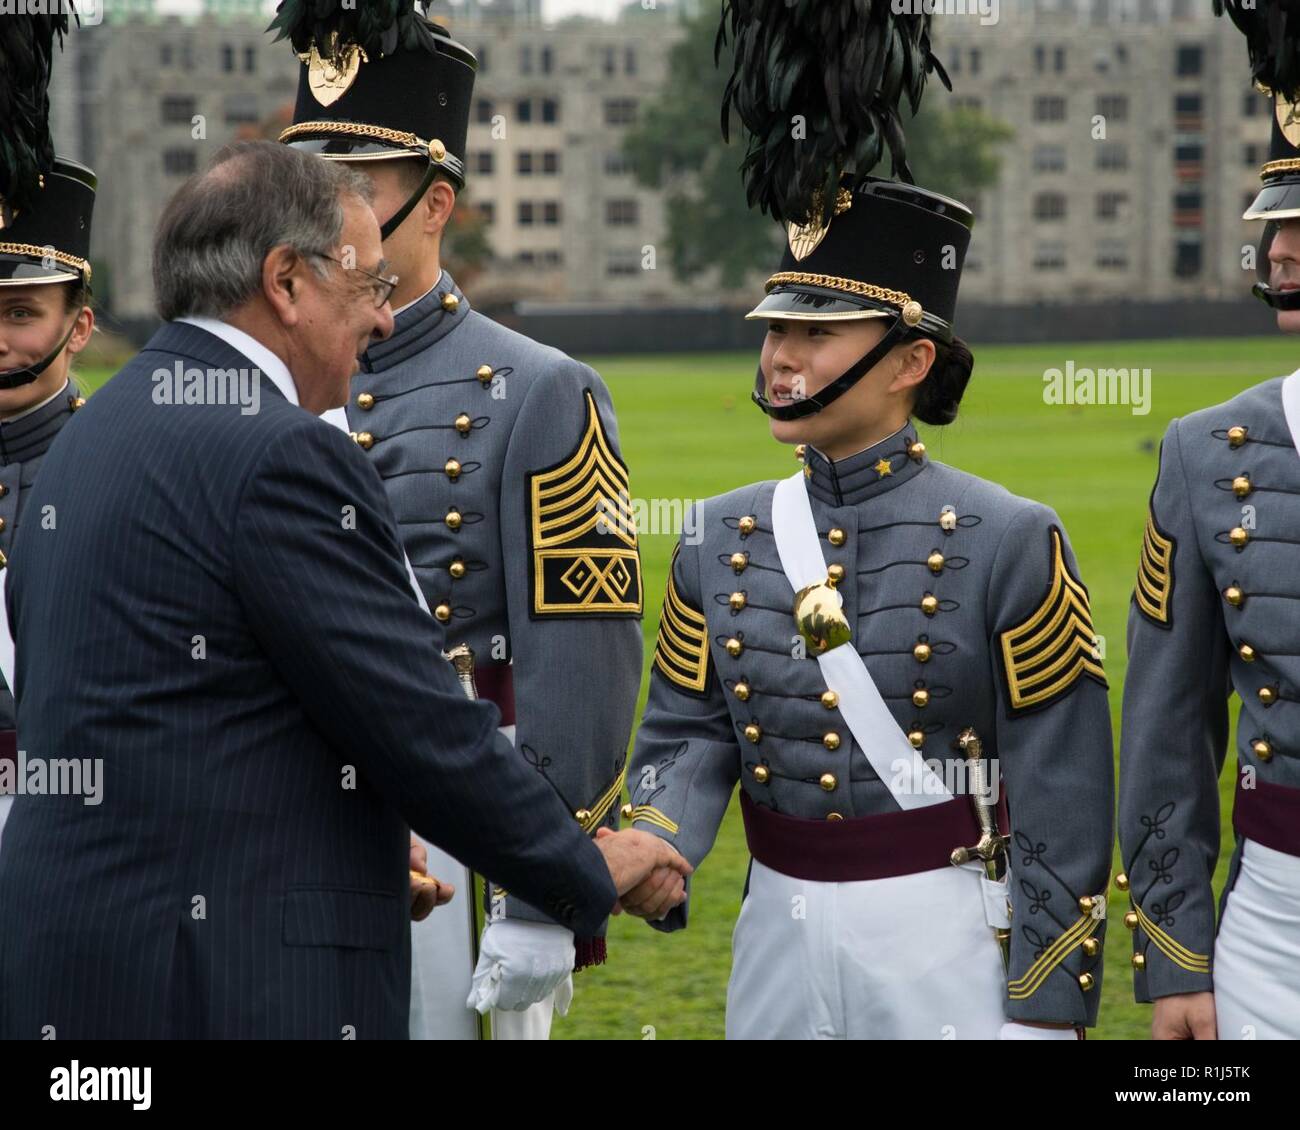 The 23rd U.S. Secretary of Defense and 2018 Sylvanus Thayer Award recipient  Leon Panetta engages with West Point cadets at the U.S. Military Academy,  in West Point, N.Y., Oct. 4, 2018. The